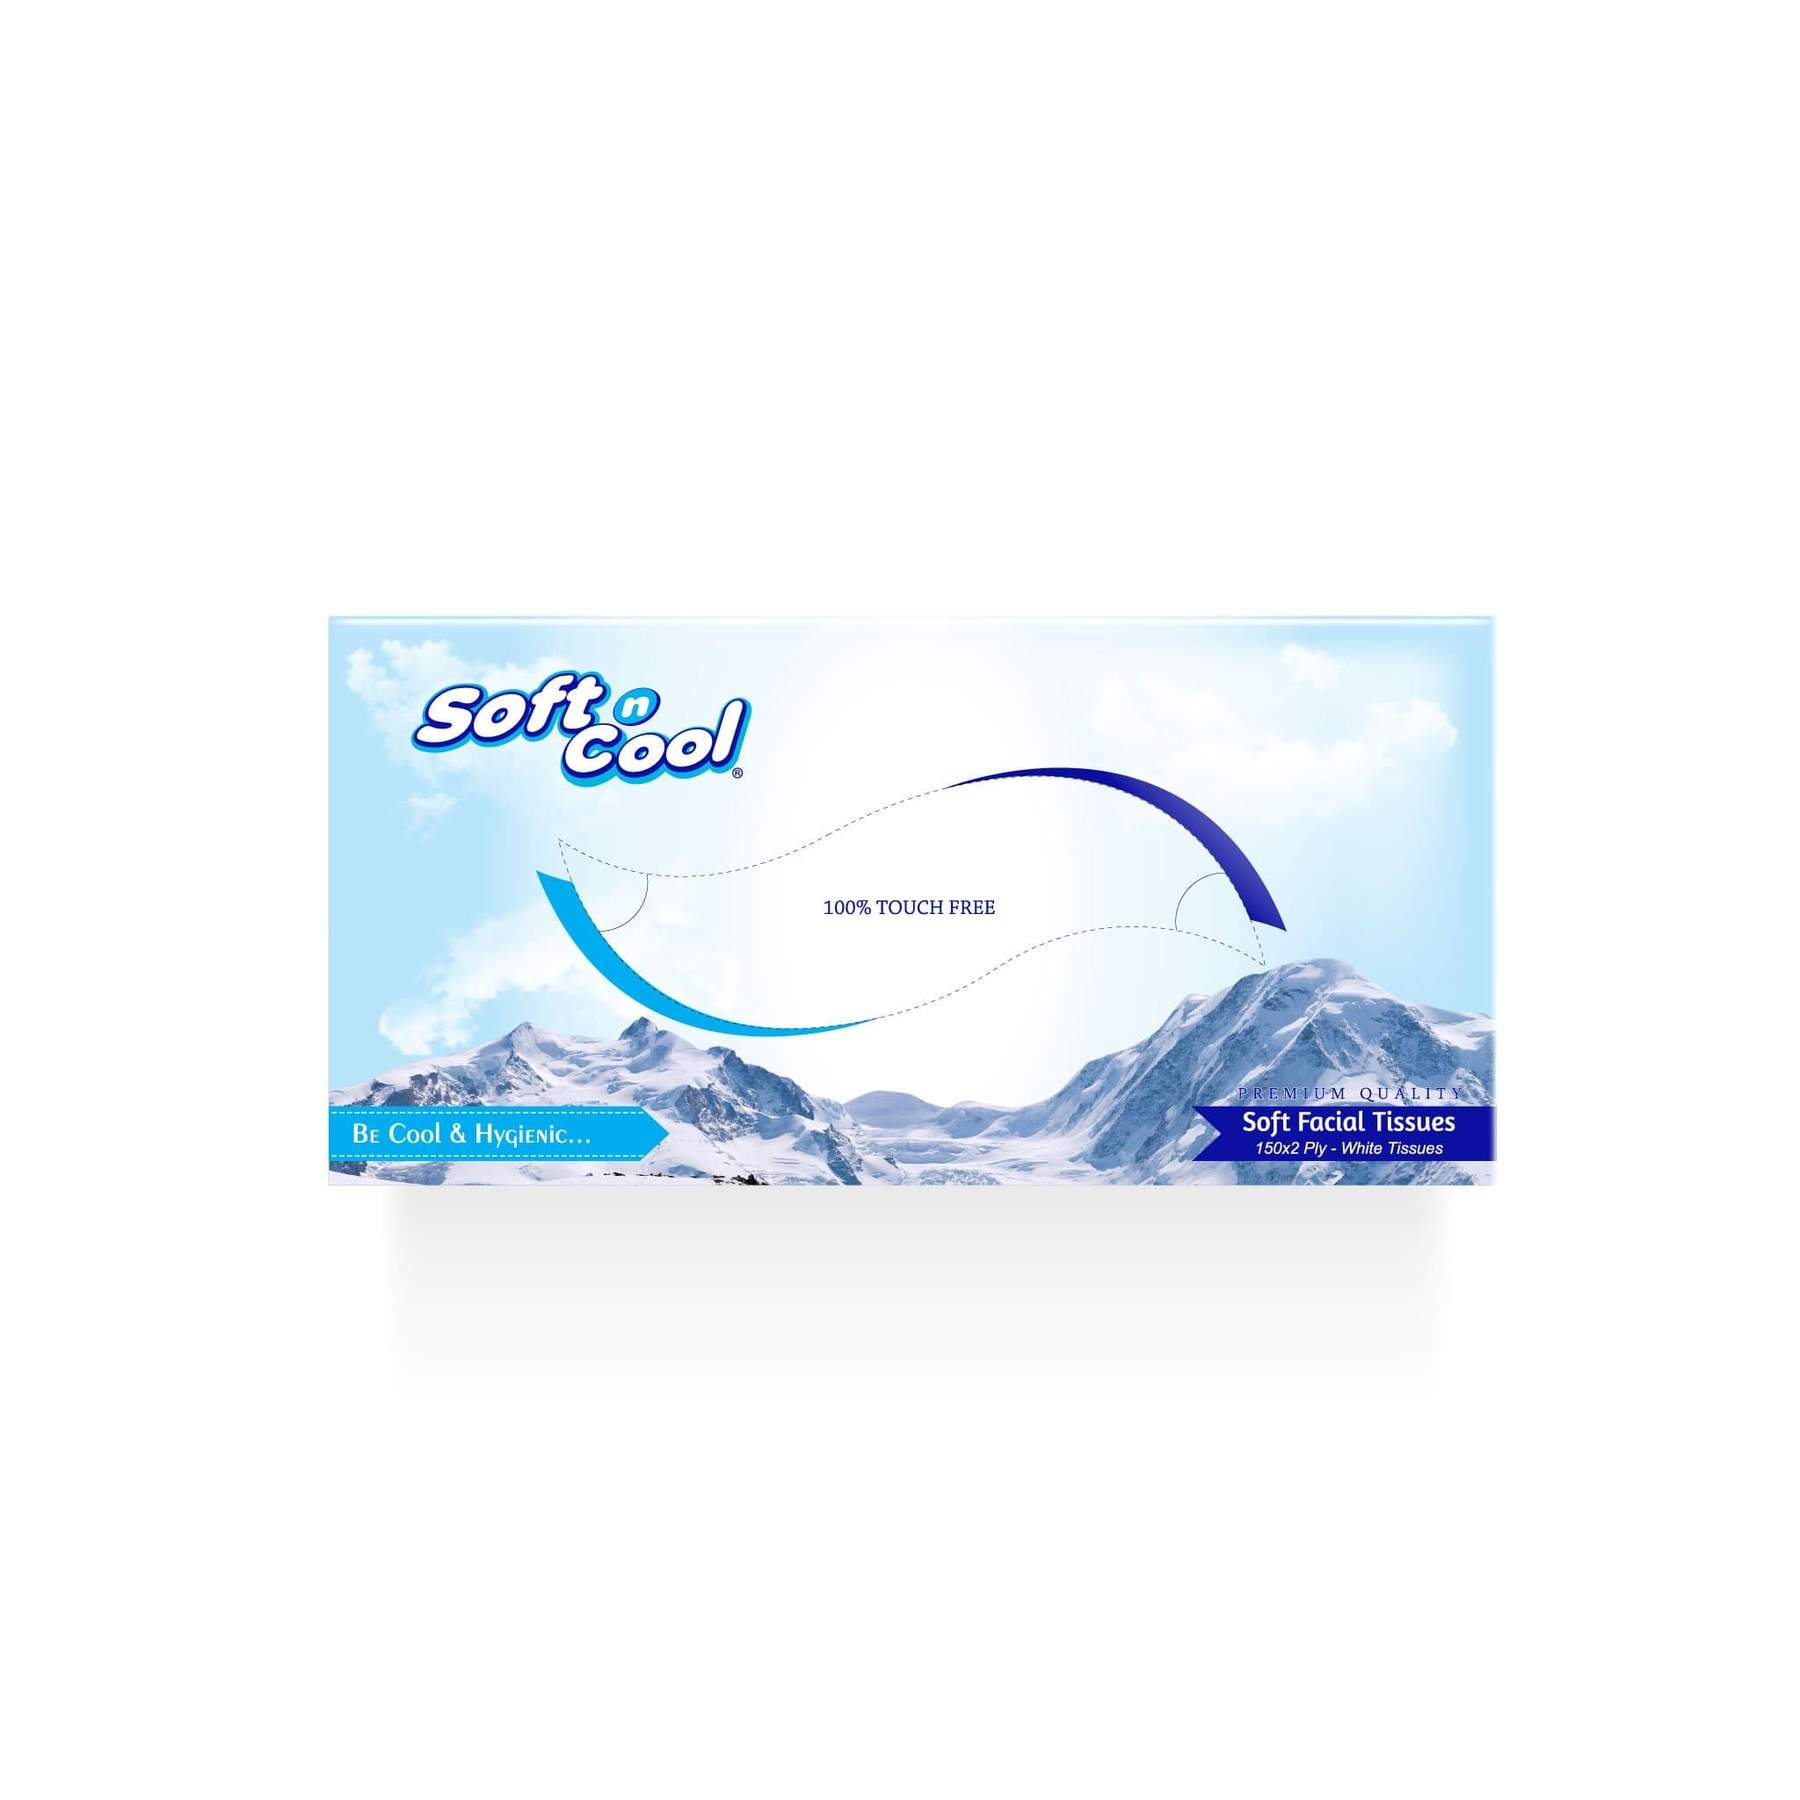 Hotpack Bahrain| Soft N Cool Facial Tissue, 150 Sheets, 5+1 Offers| 36 Boxes